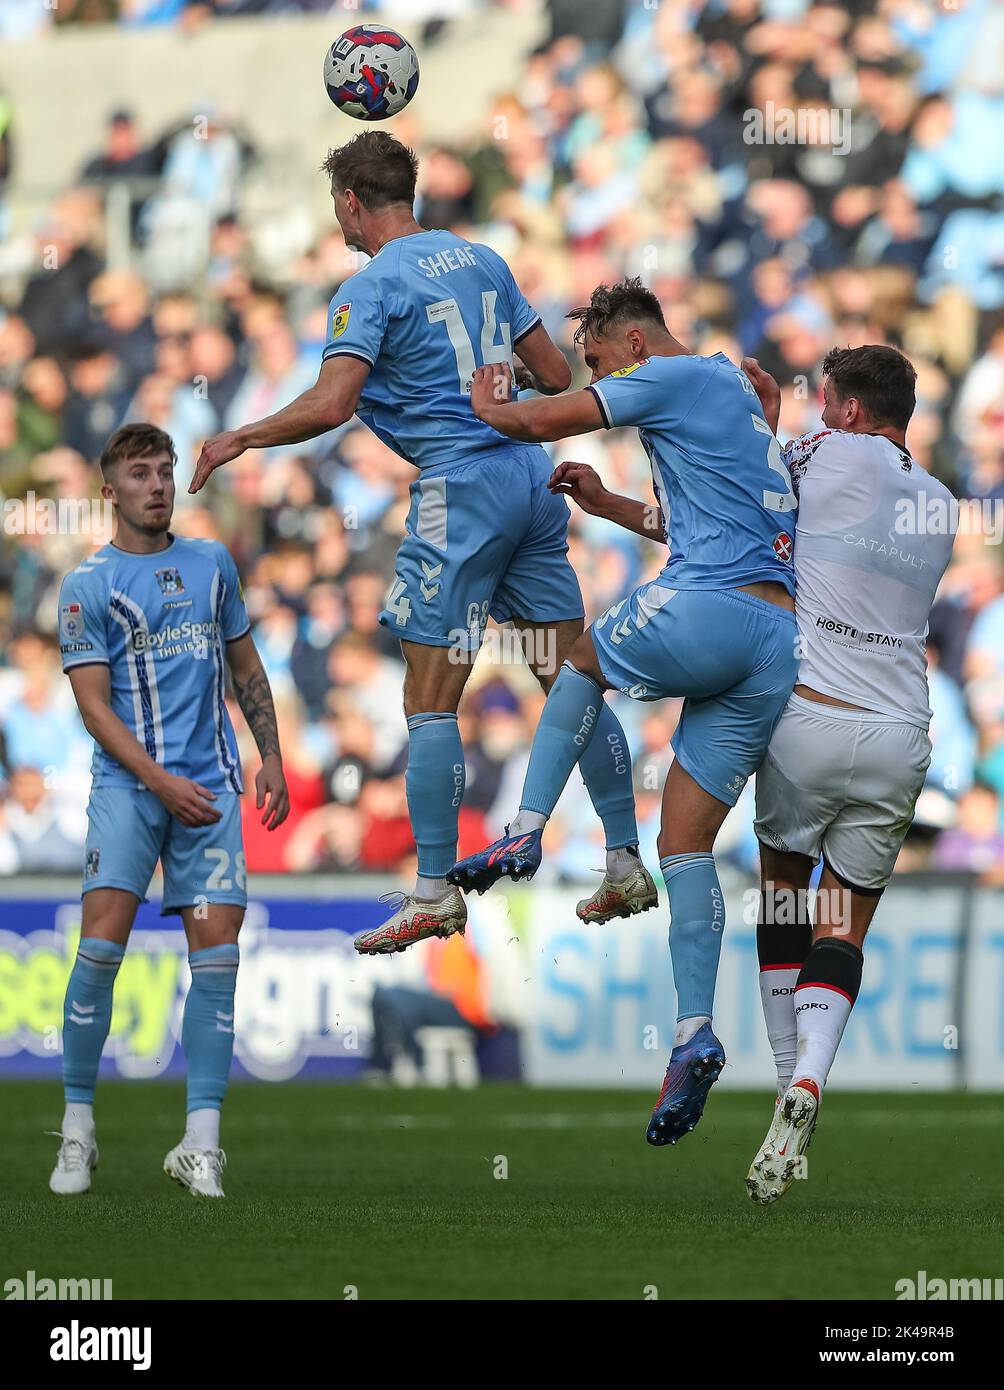 Ben Sheaf #14 of Coventry City wins a header during the Sky Bet Championship match Coventry City vs Middlesbrough at Coventry Building Society Arena, Coventry, United Kingdom, 1st October 2022  (Photo by Gareth Evans/News Images) Stock Photo